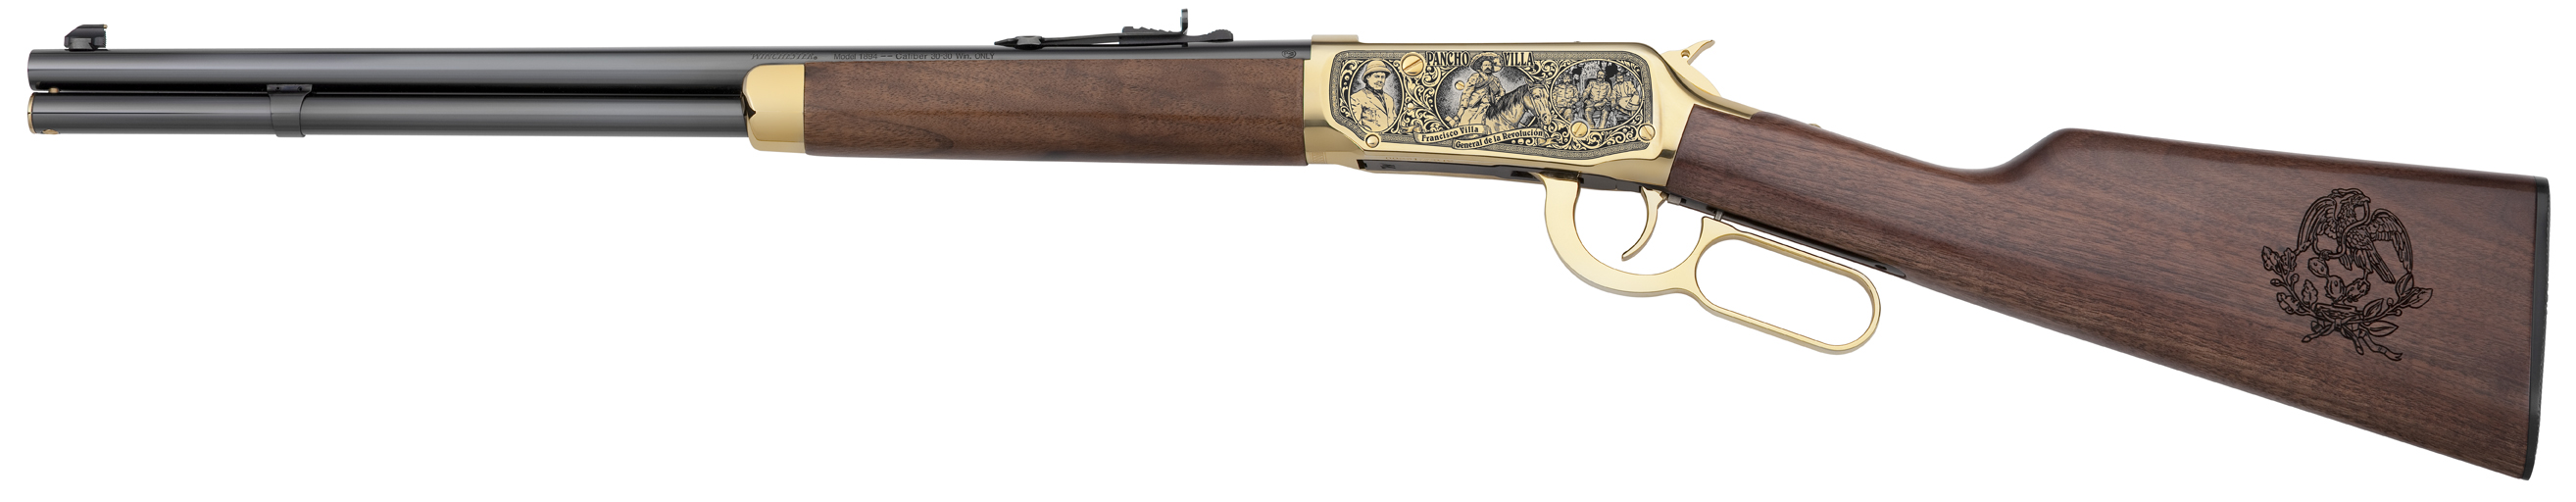 Winchester Rifle #13